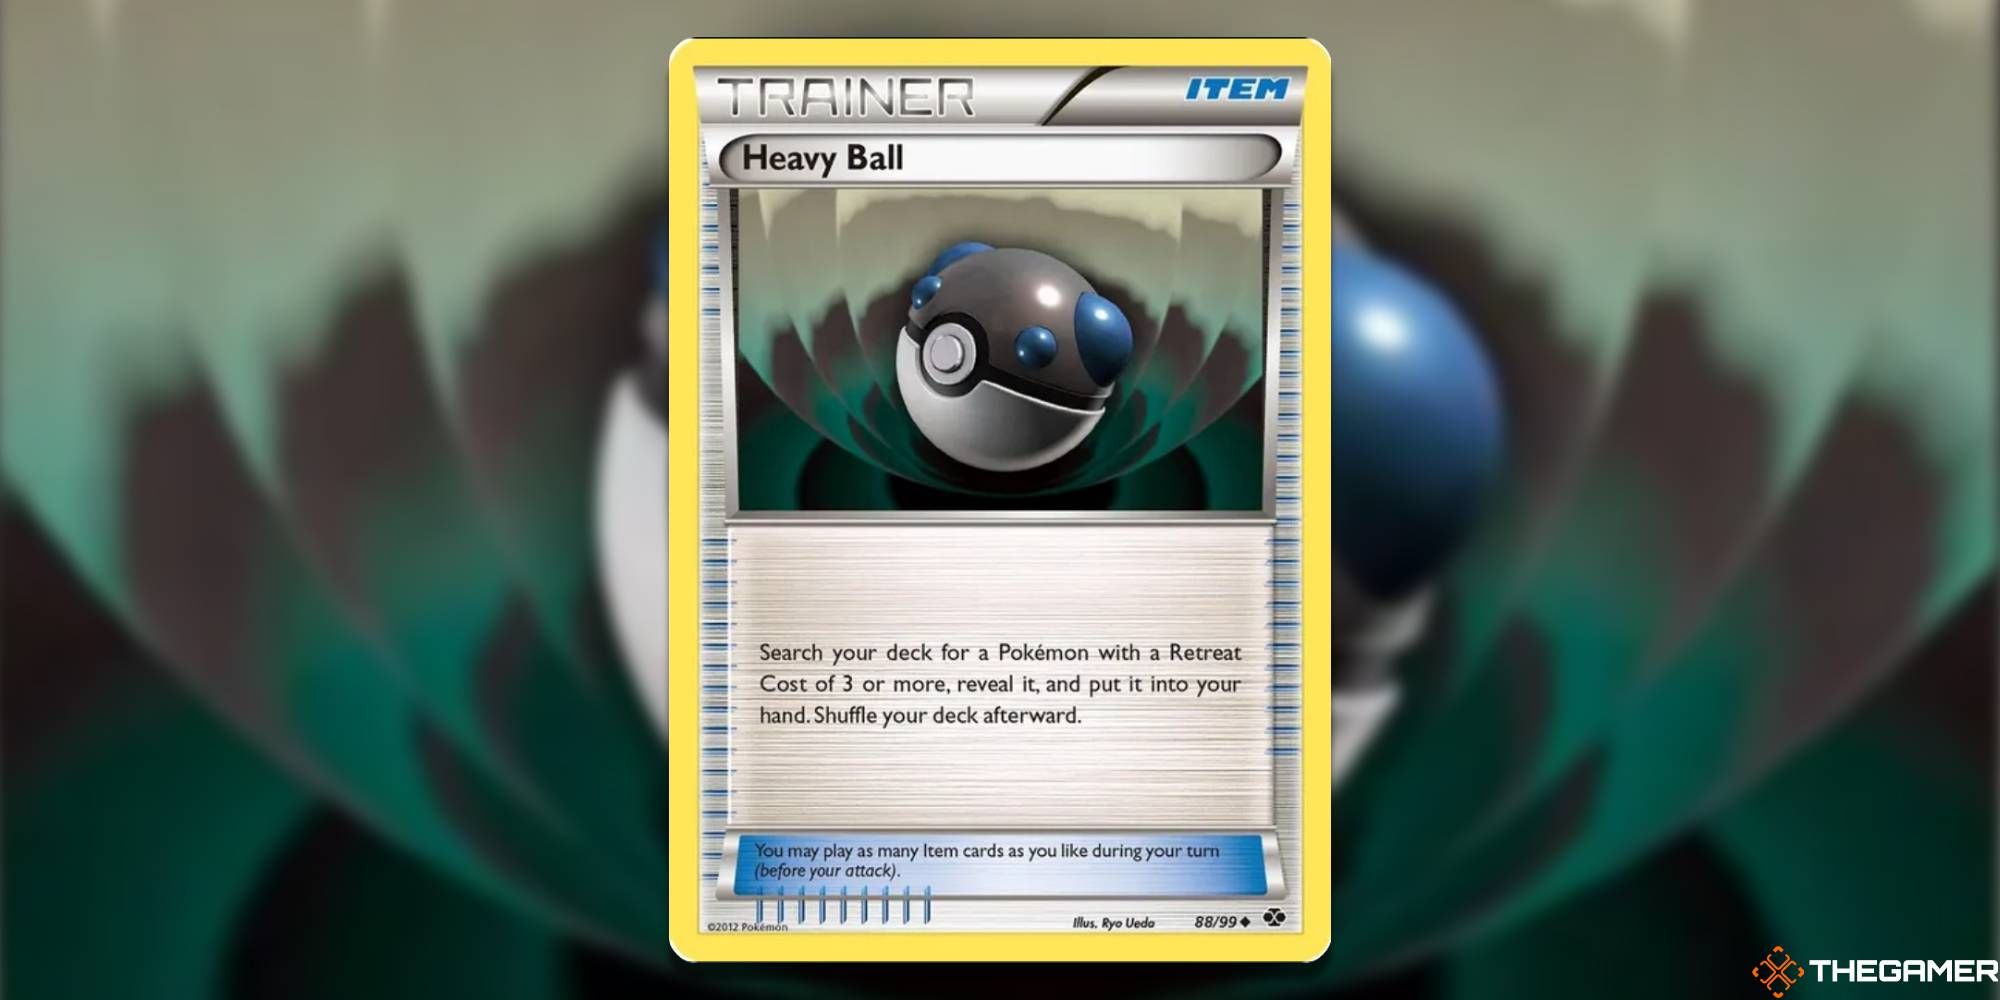 Heavy Ball from the Pokemon TCG, with blurred background